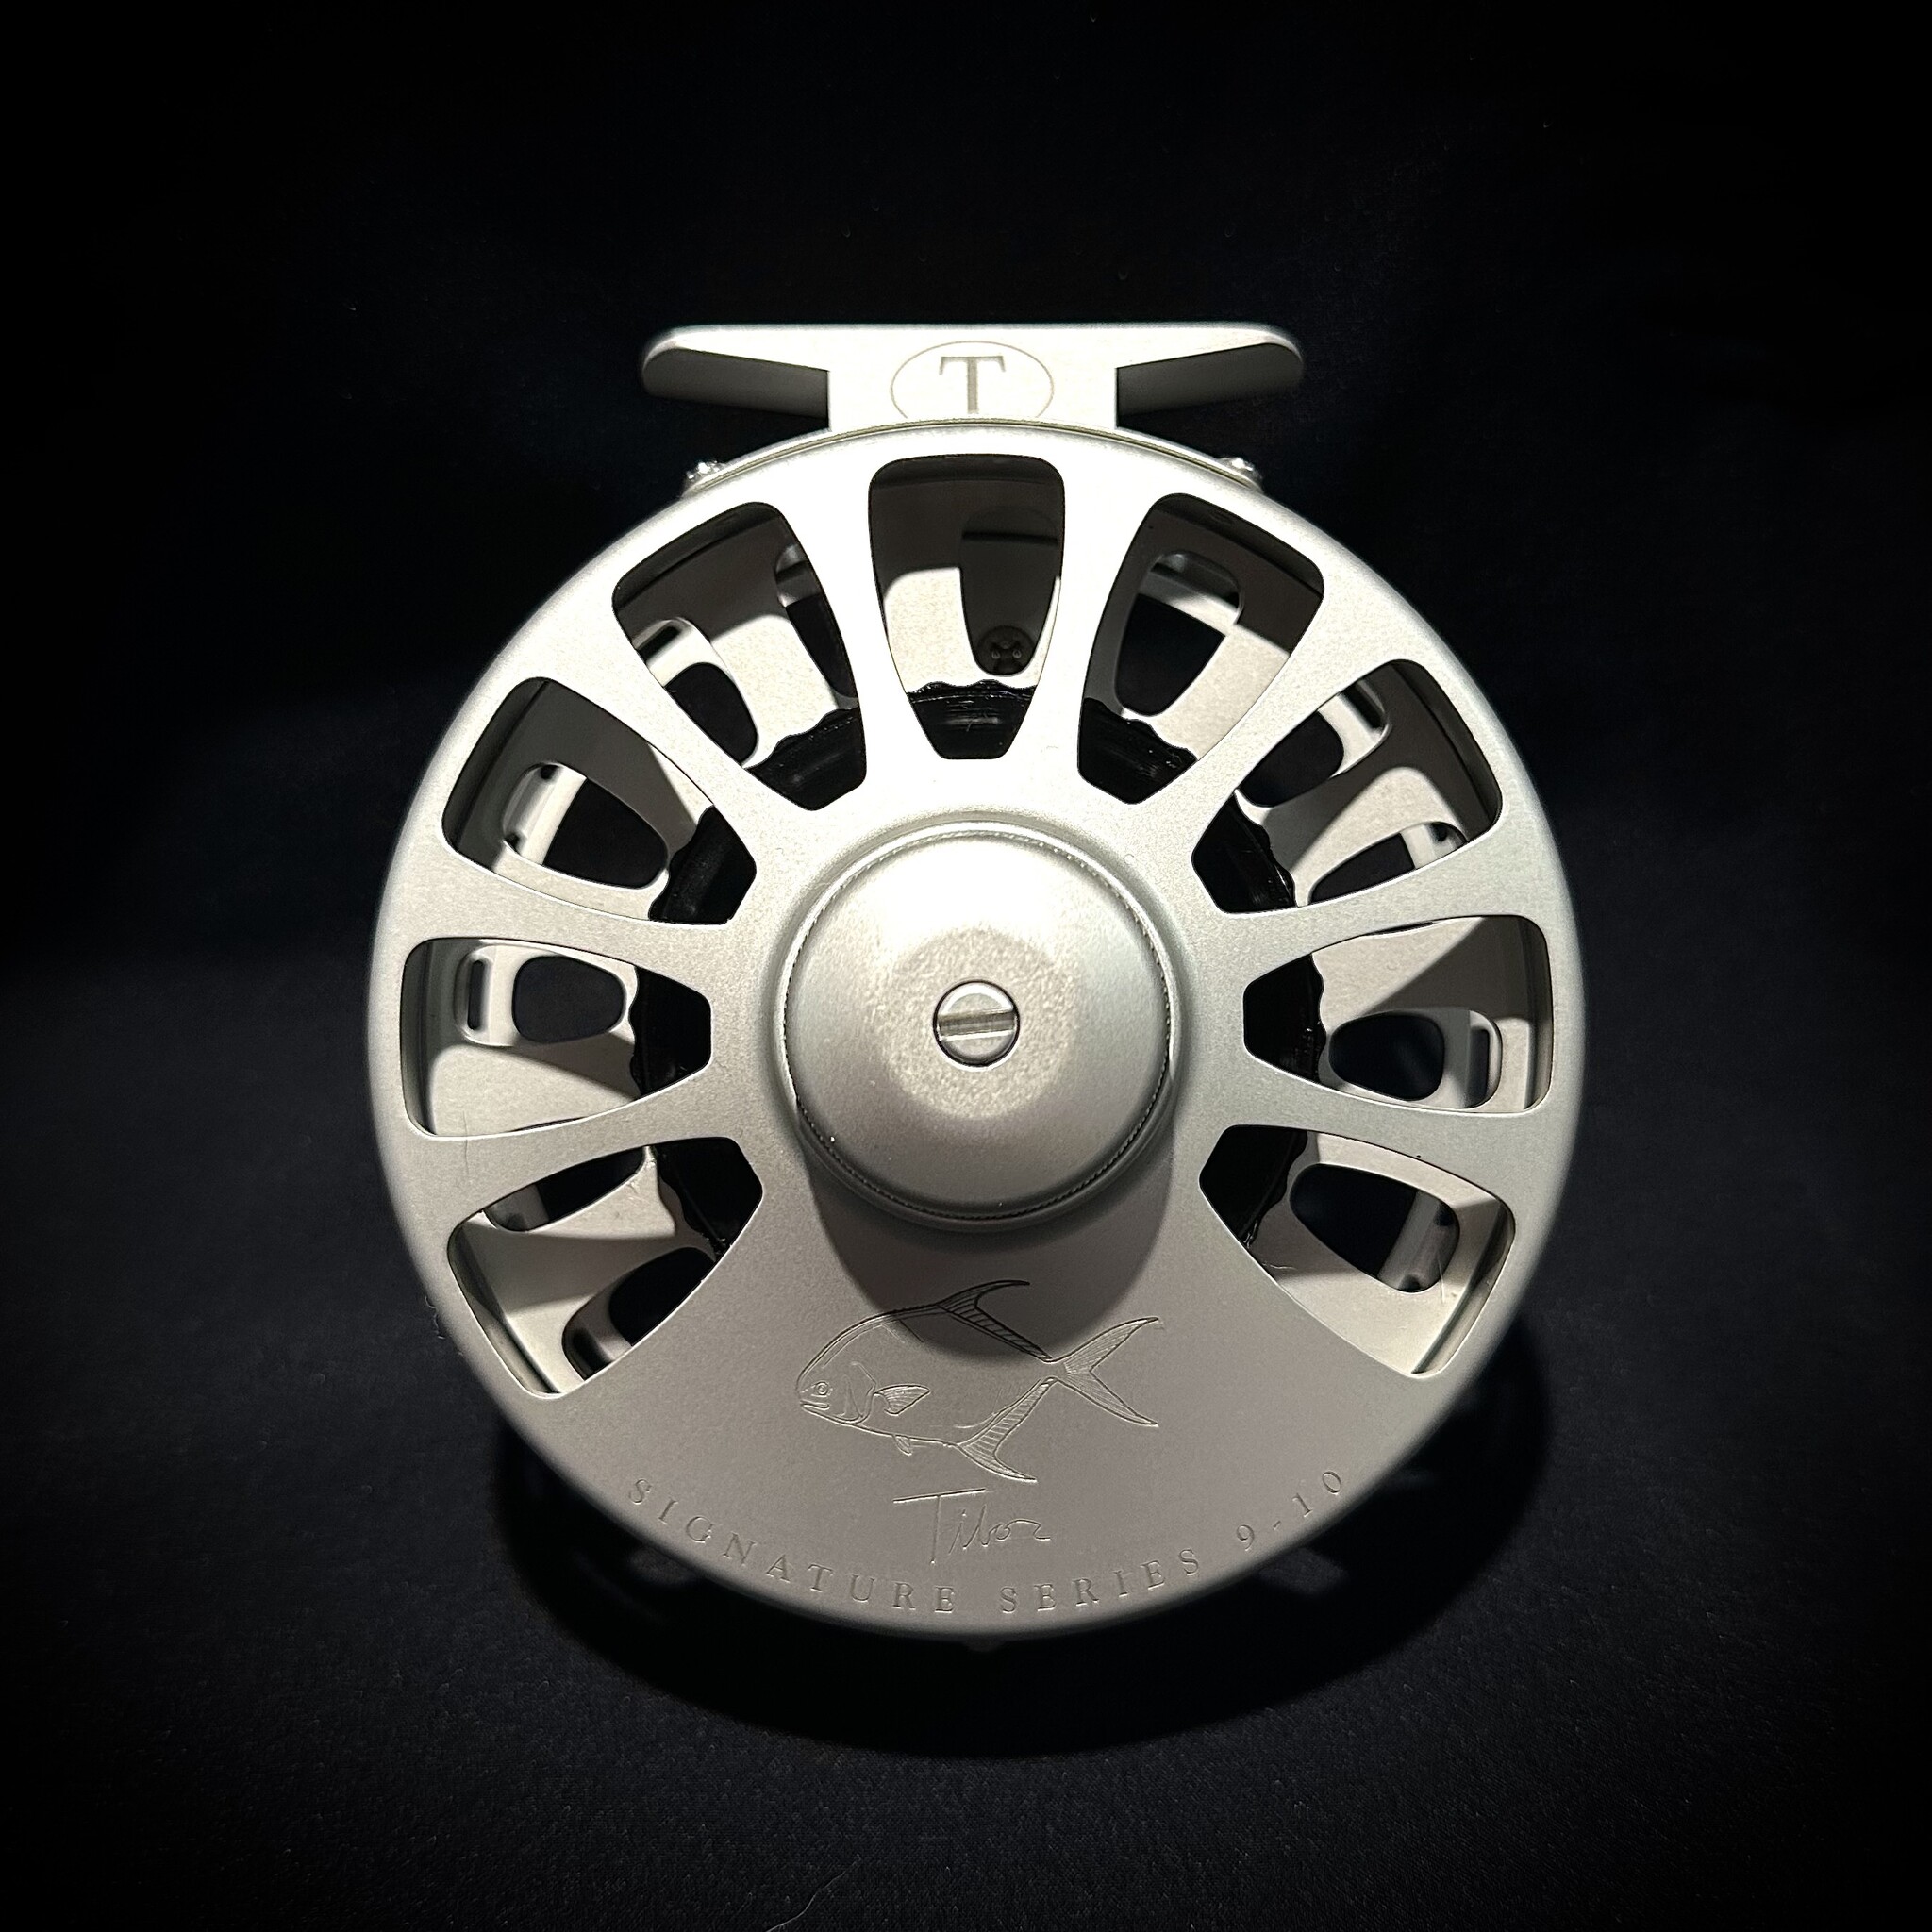 Tibor Everglades Fly Reel (Silver Frost)